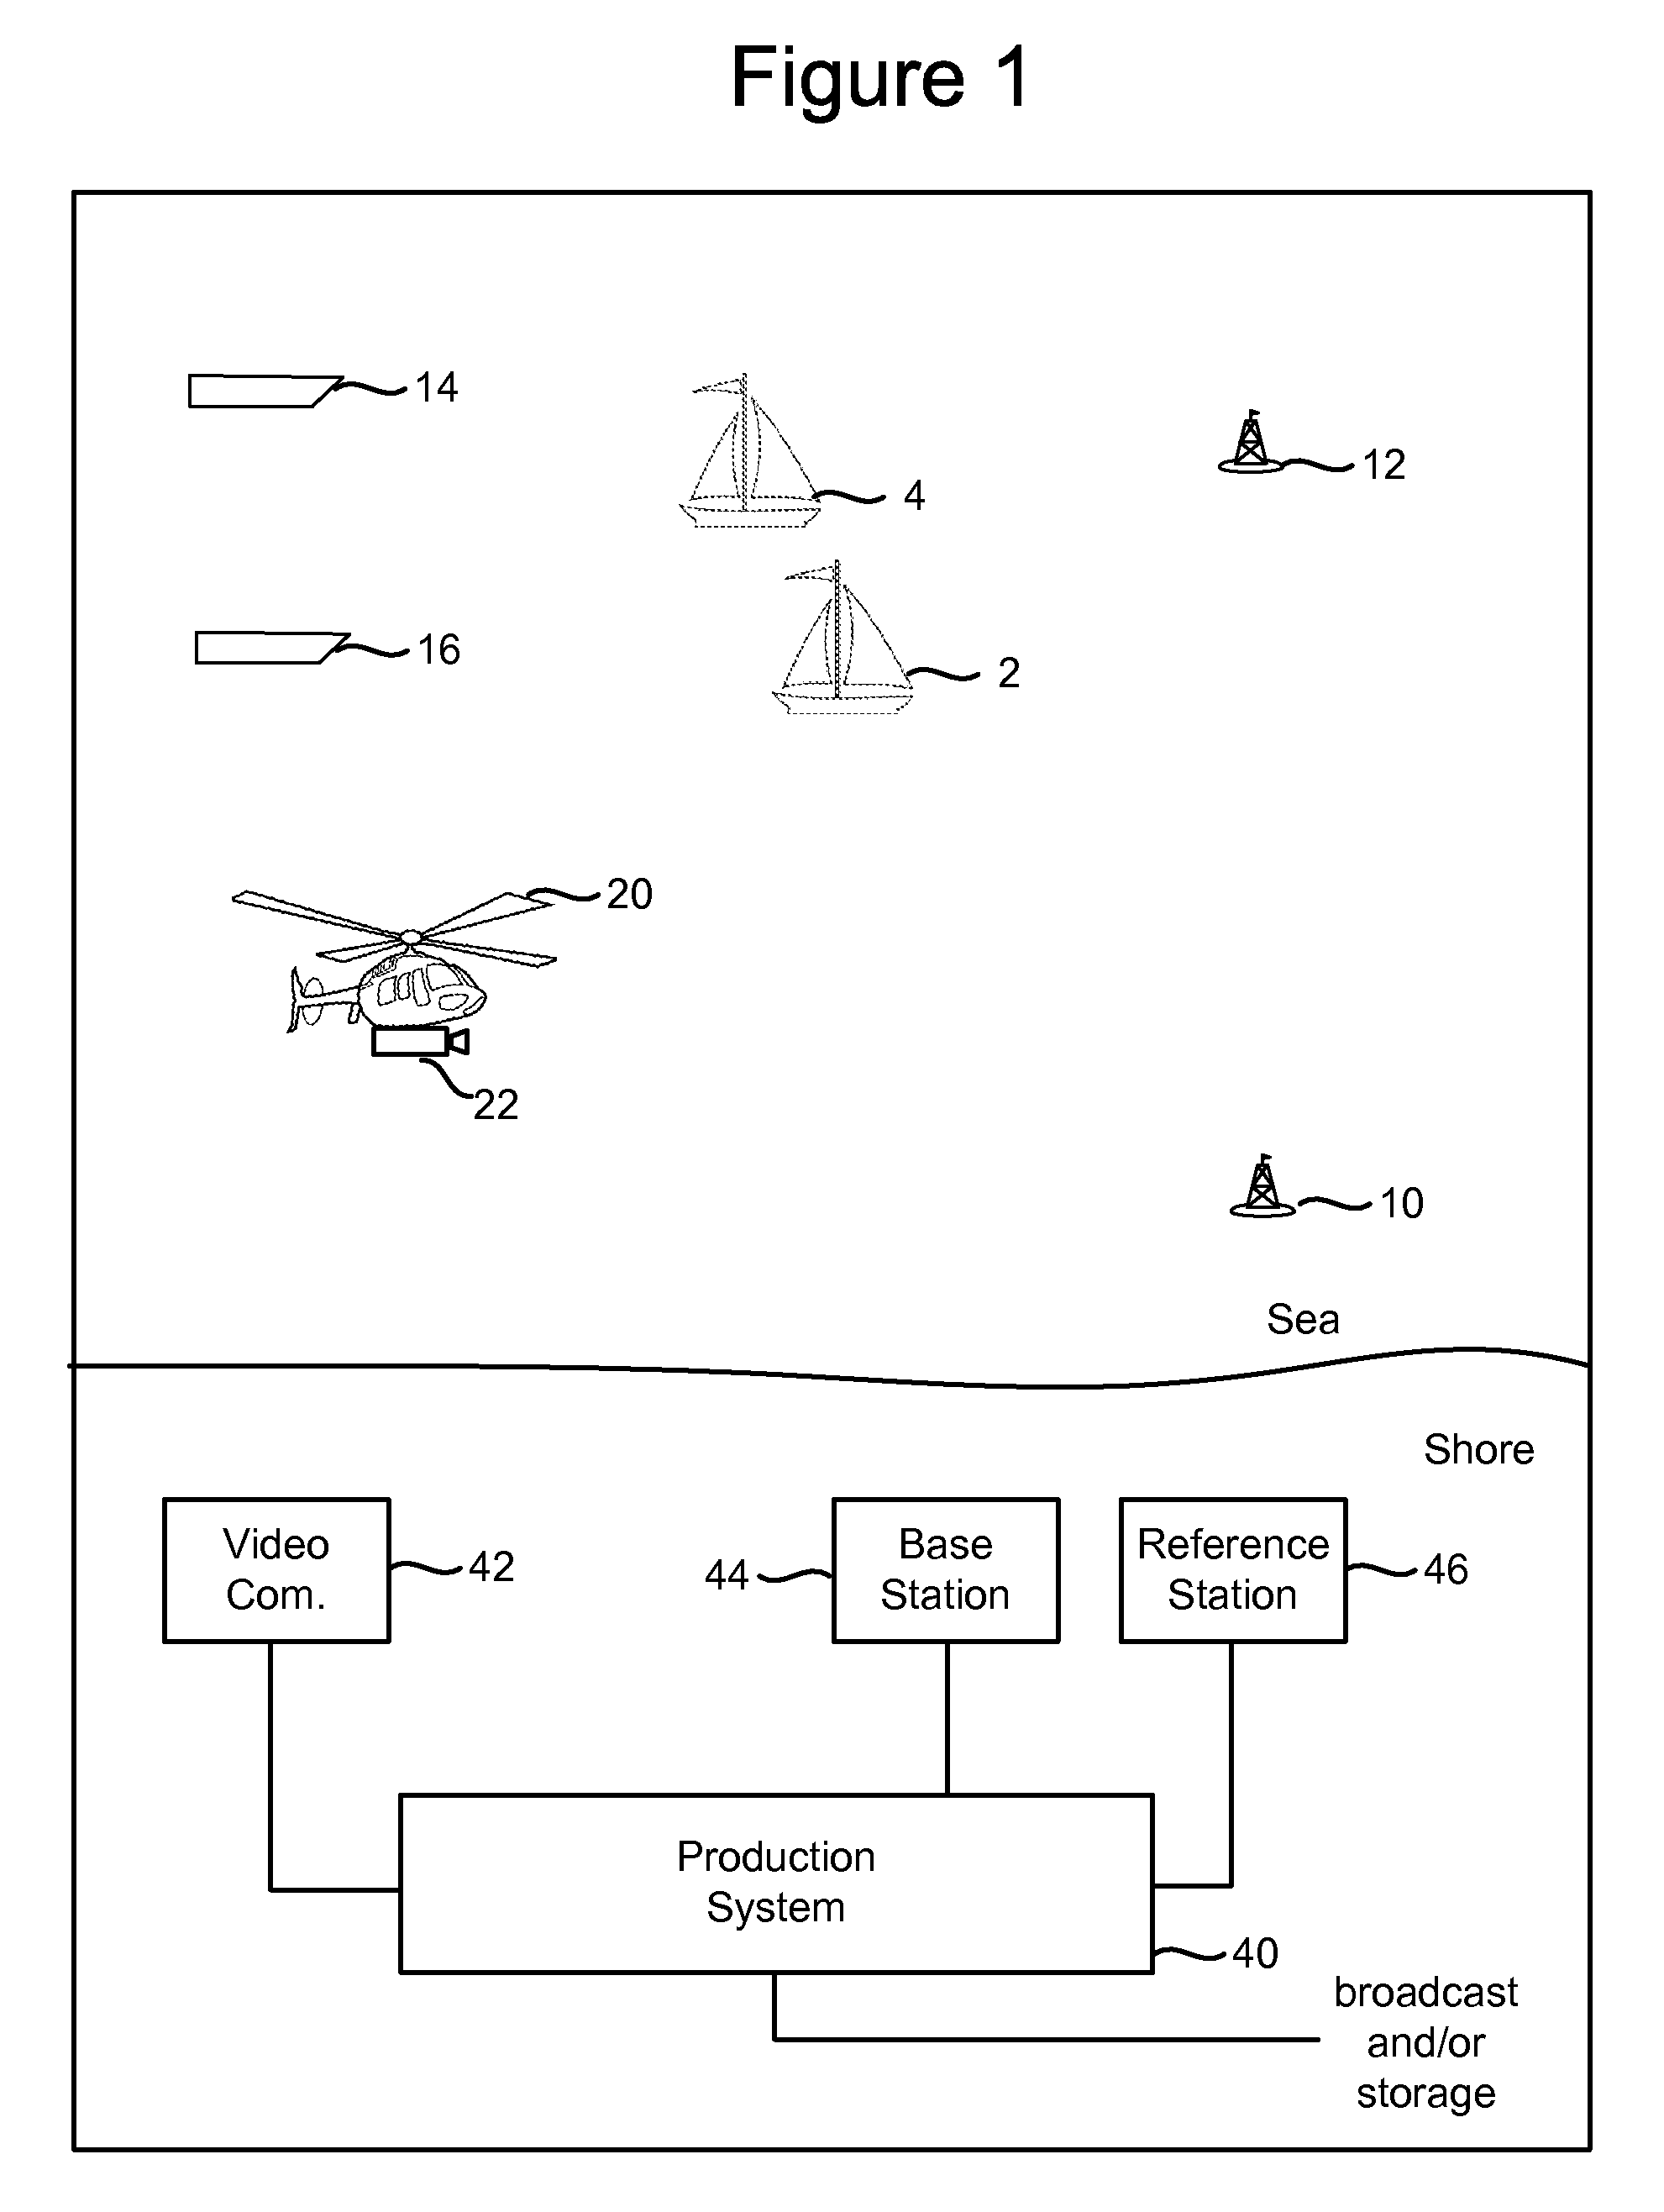 System for enhancing video from a mobile camera